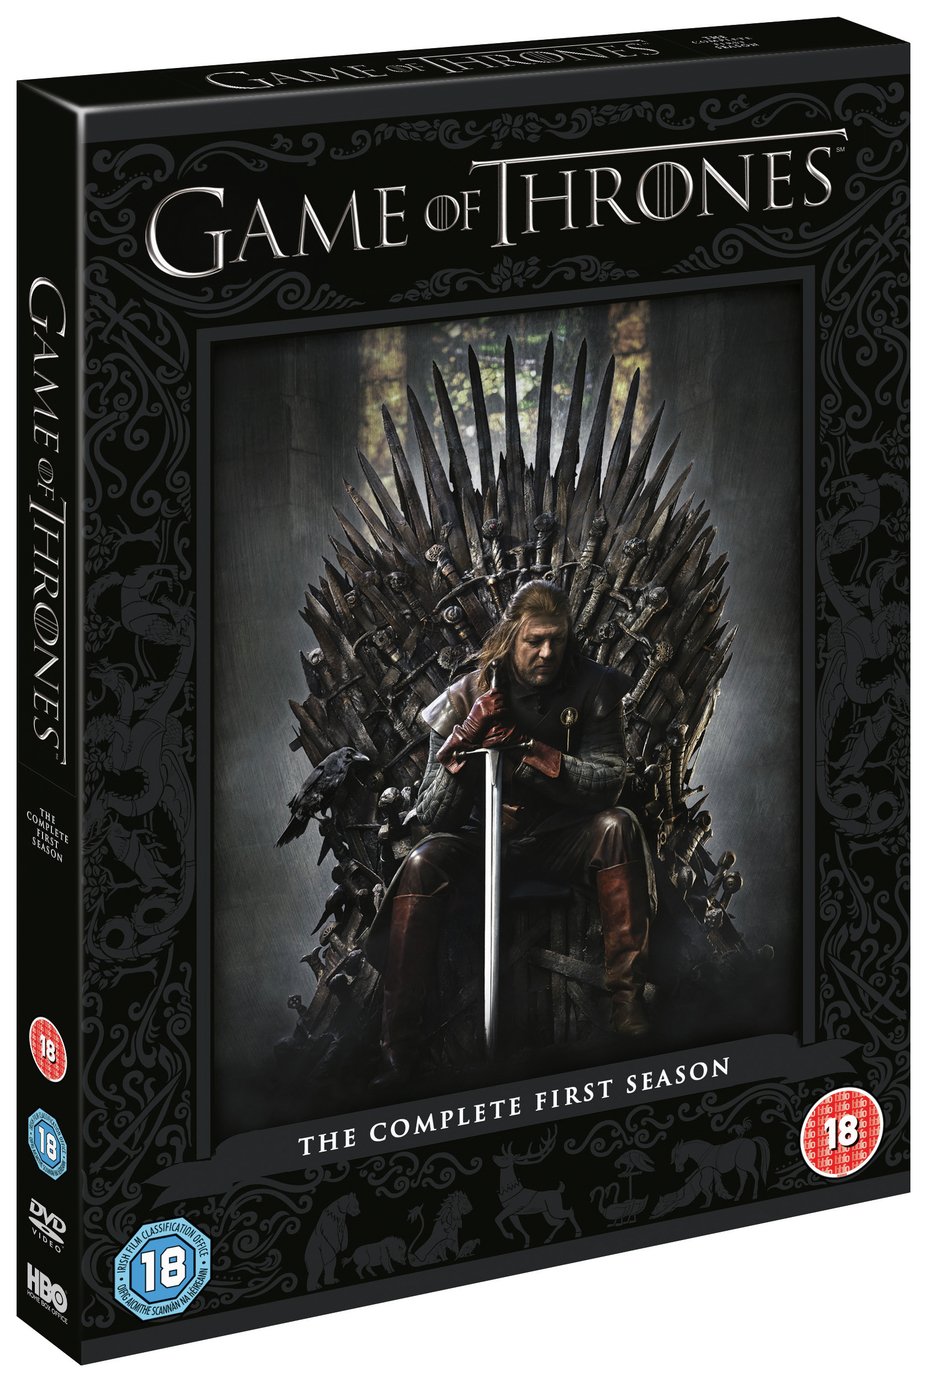 Game of Thrones Season 1 DVD Review